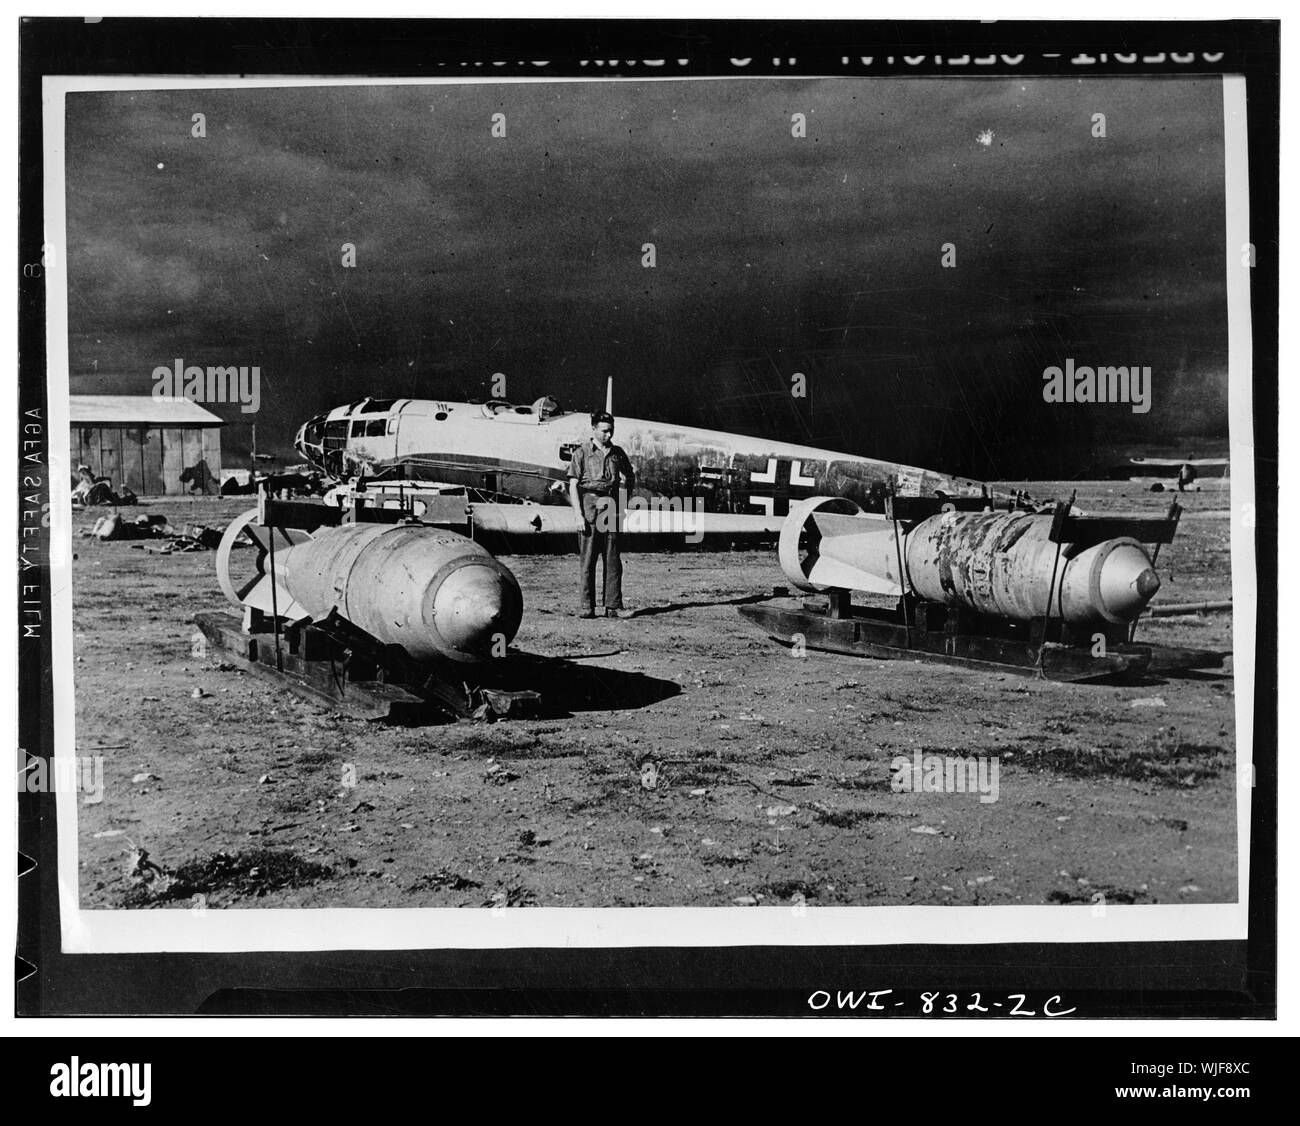 Vicinity of Neghazi, Libya. When the United Nations air forces attacked this airfield they forced the Nazis to abandon much equipment and ammunition. In the foreground are two heavy bombs. Note the sleds which were used to move them around the airfield. Stock Photo